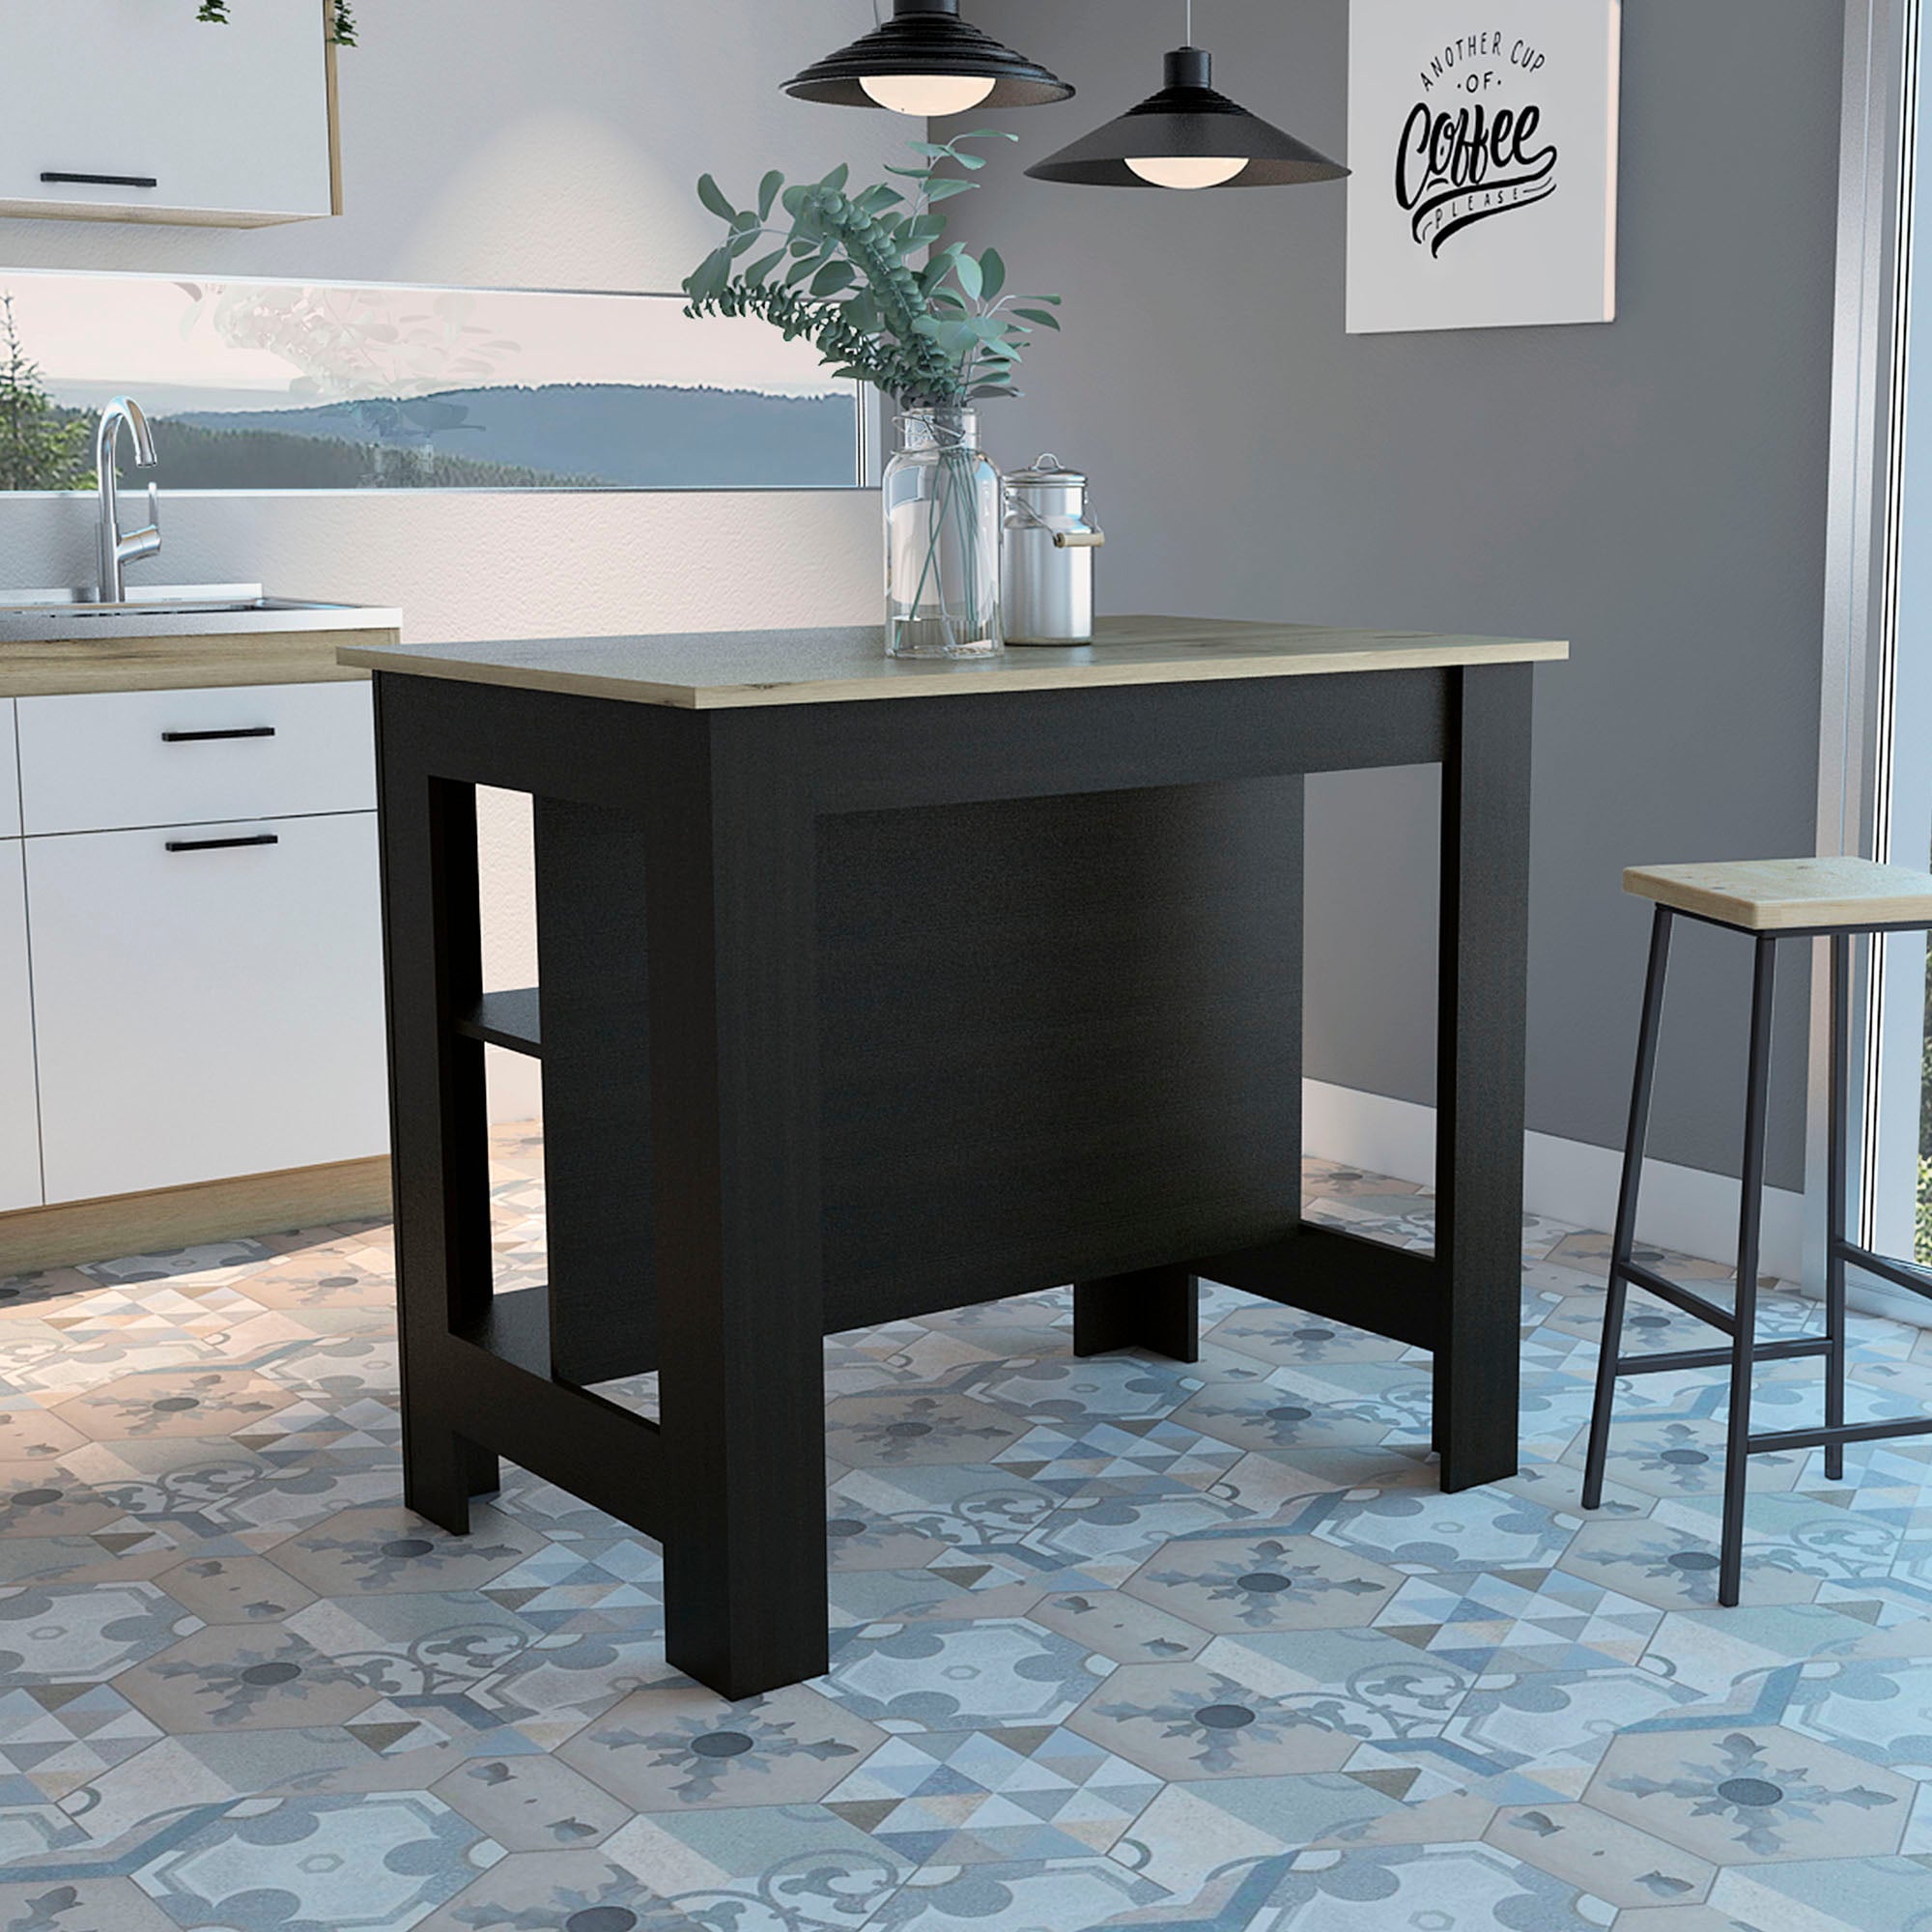 Boahaus Le Havre Black Painted Kitchen Island， Wood Tabletop